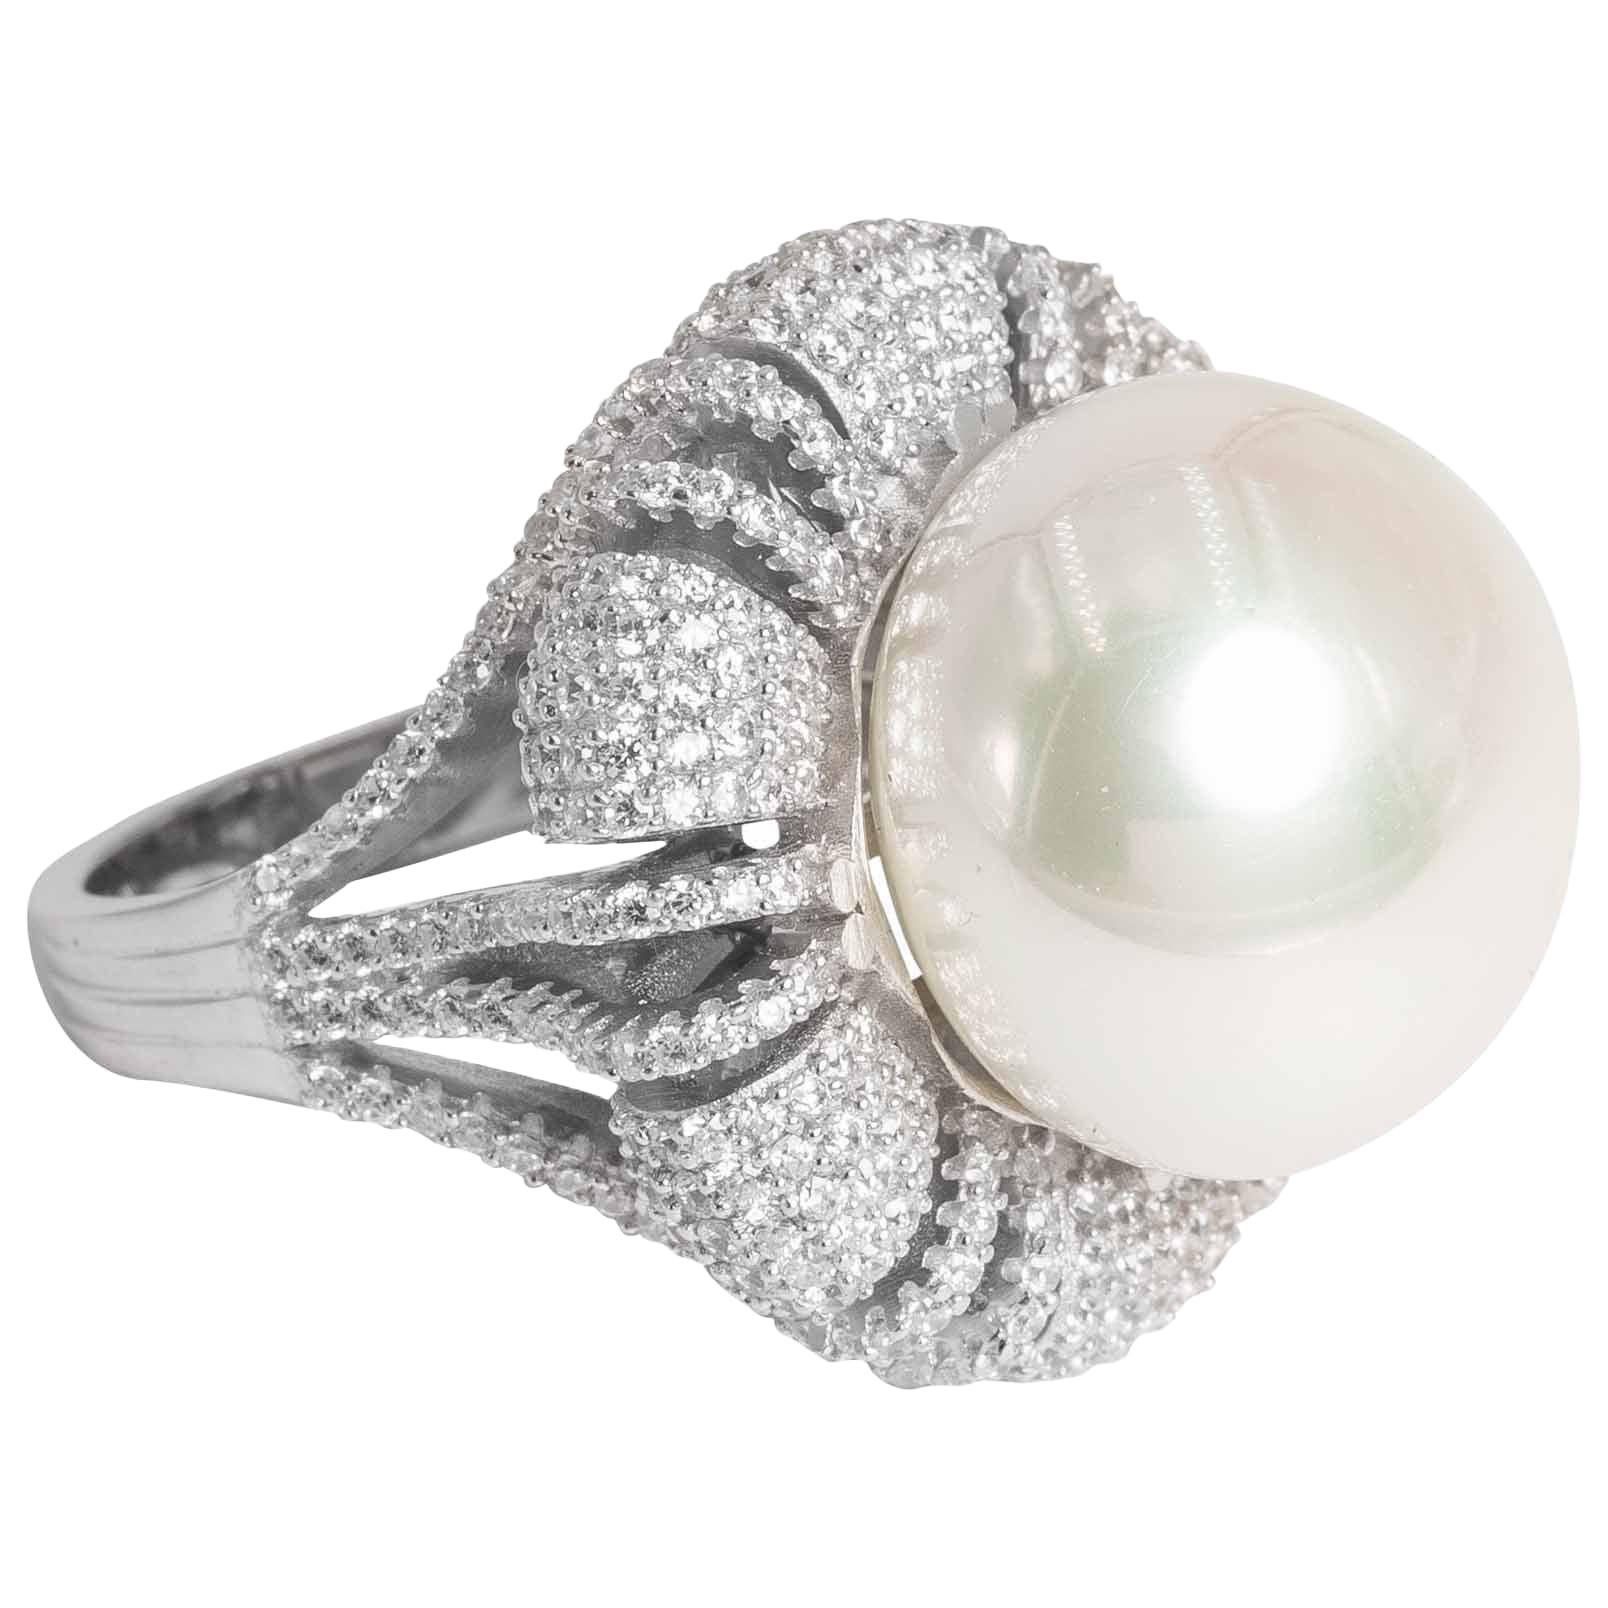 Large South Sea  Pearl Faux  Cubic Zirconia Cocktail Ring by Clive Kandel